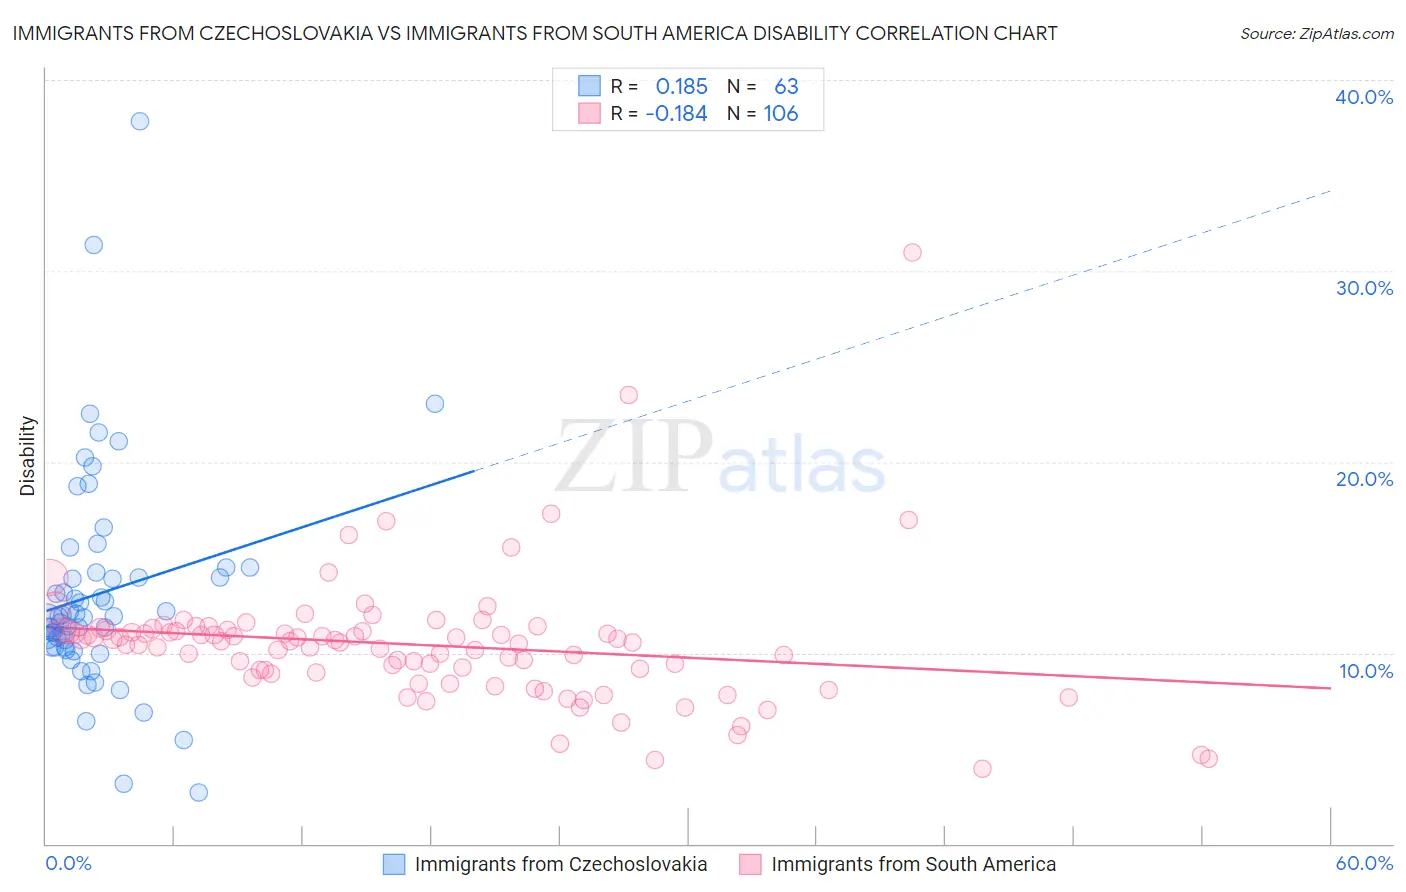 Immigrants from Czechoslovakia vs Immigrants from South America Disability